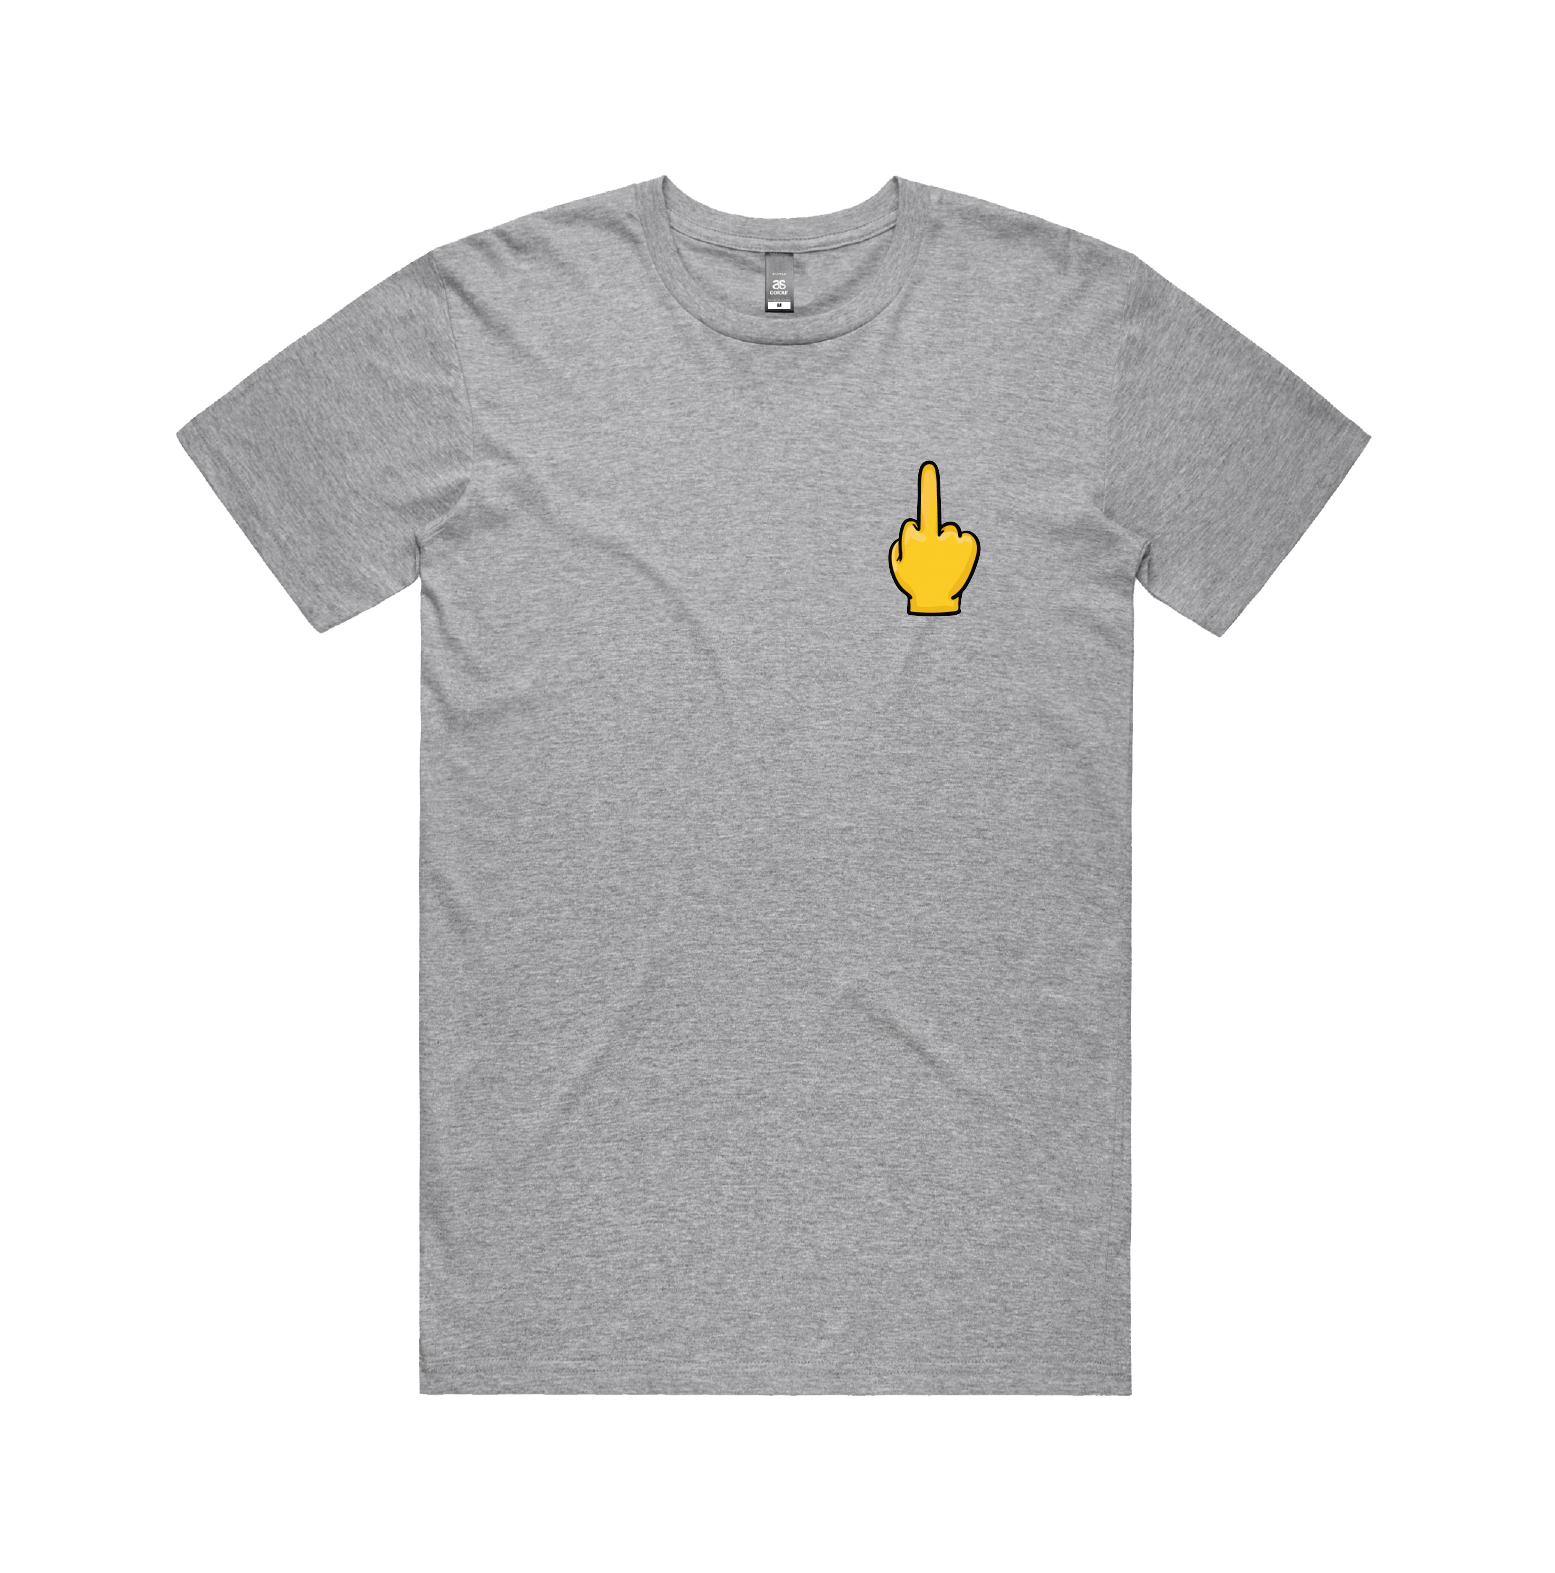 S / Grey / Small Front Design Up Yours 🖕 - Men's T Shirt